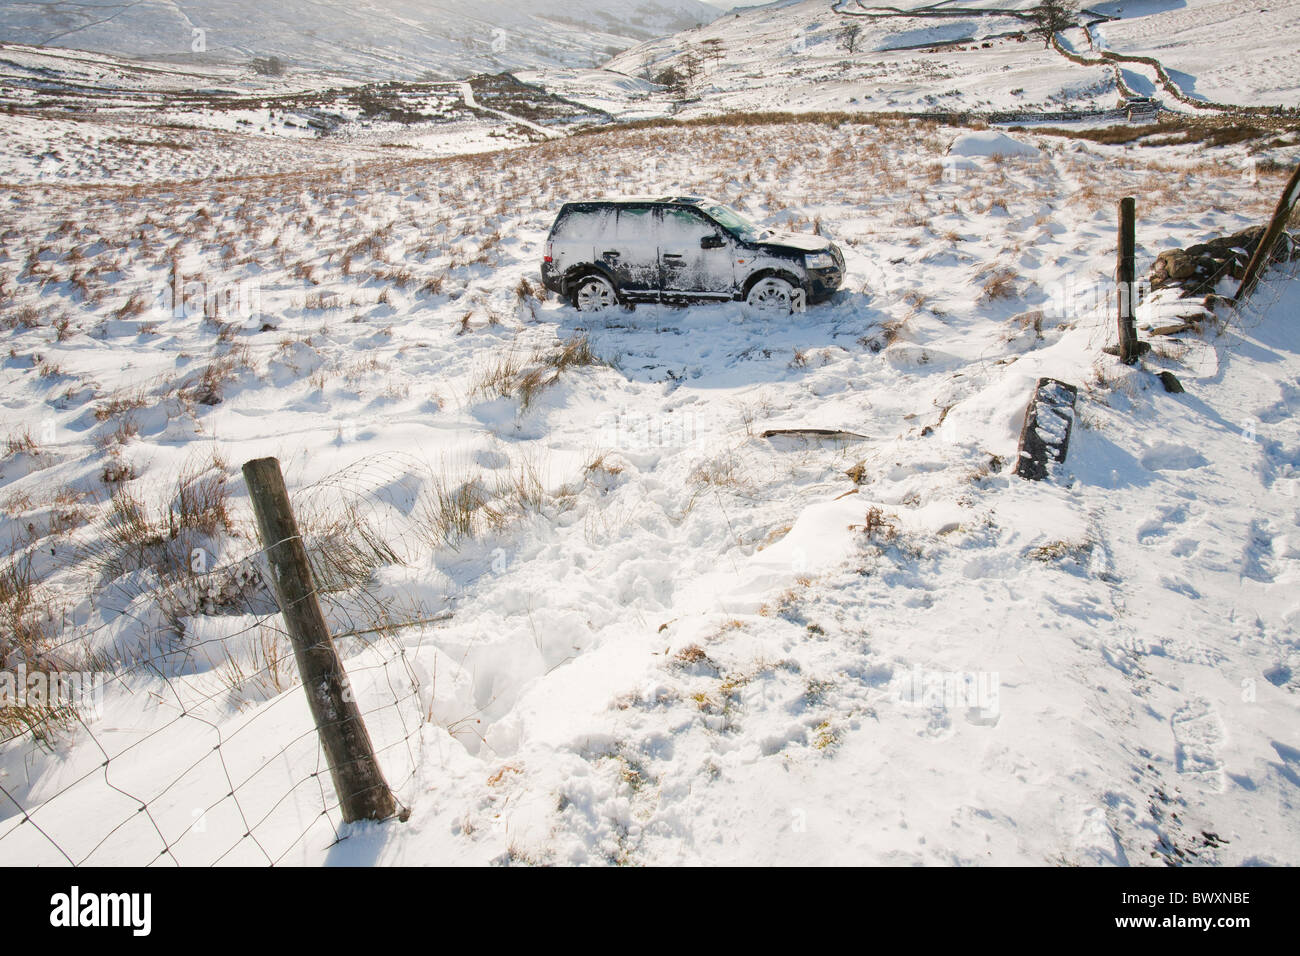 A police car crashed on Kirkstone Pass in the Lake District when they lost control of a borrowed vehicle. Stock Photo